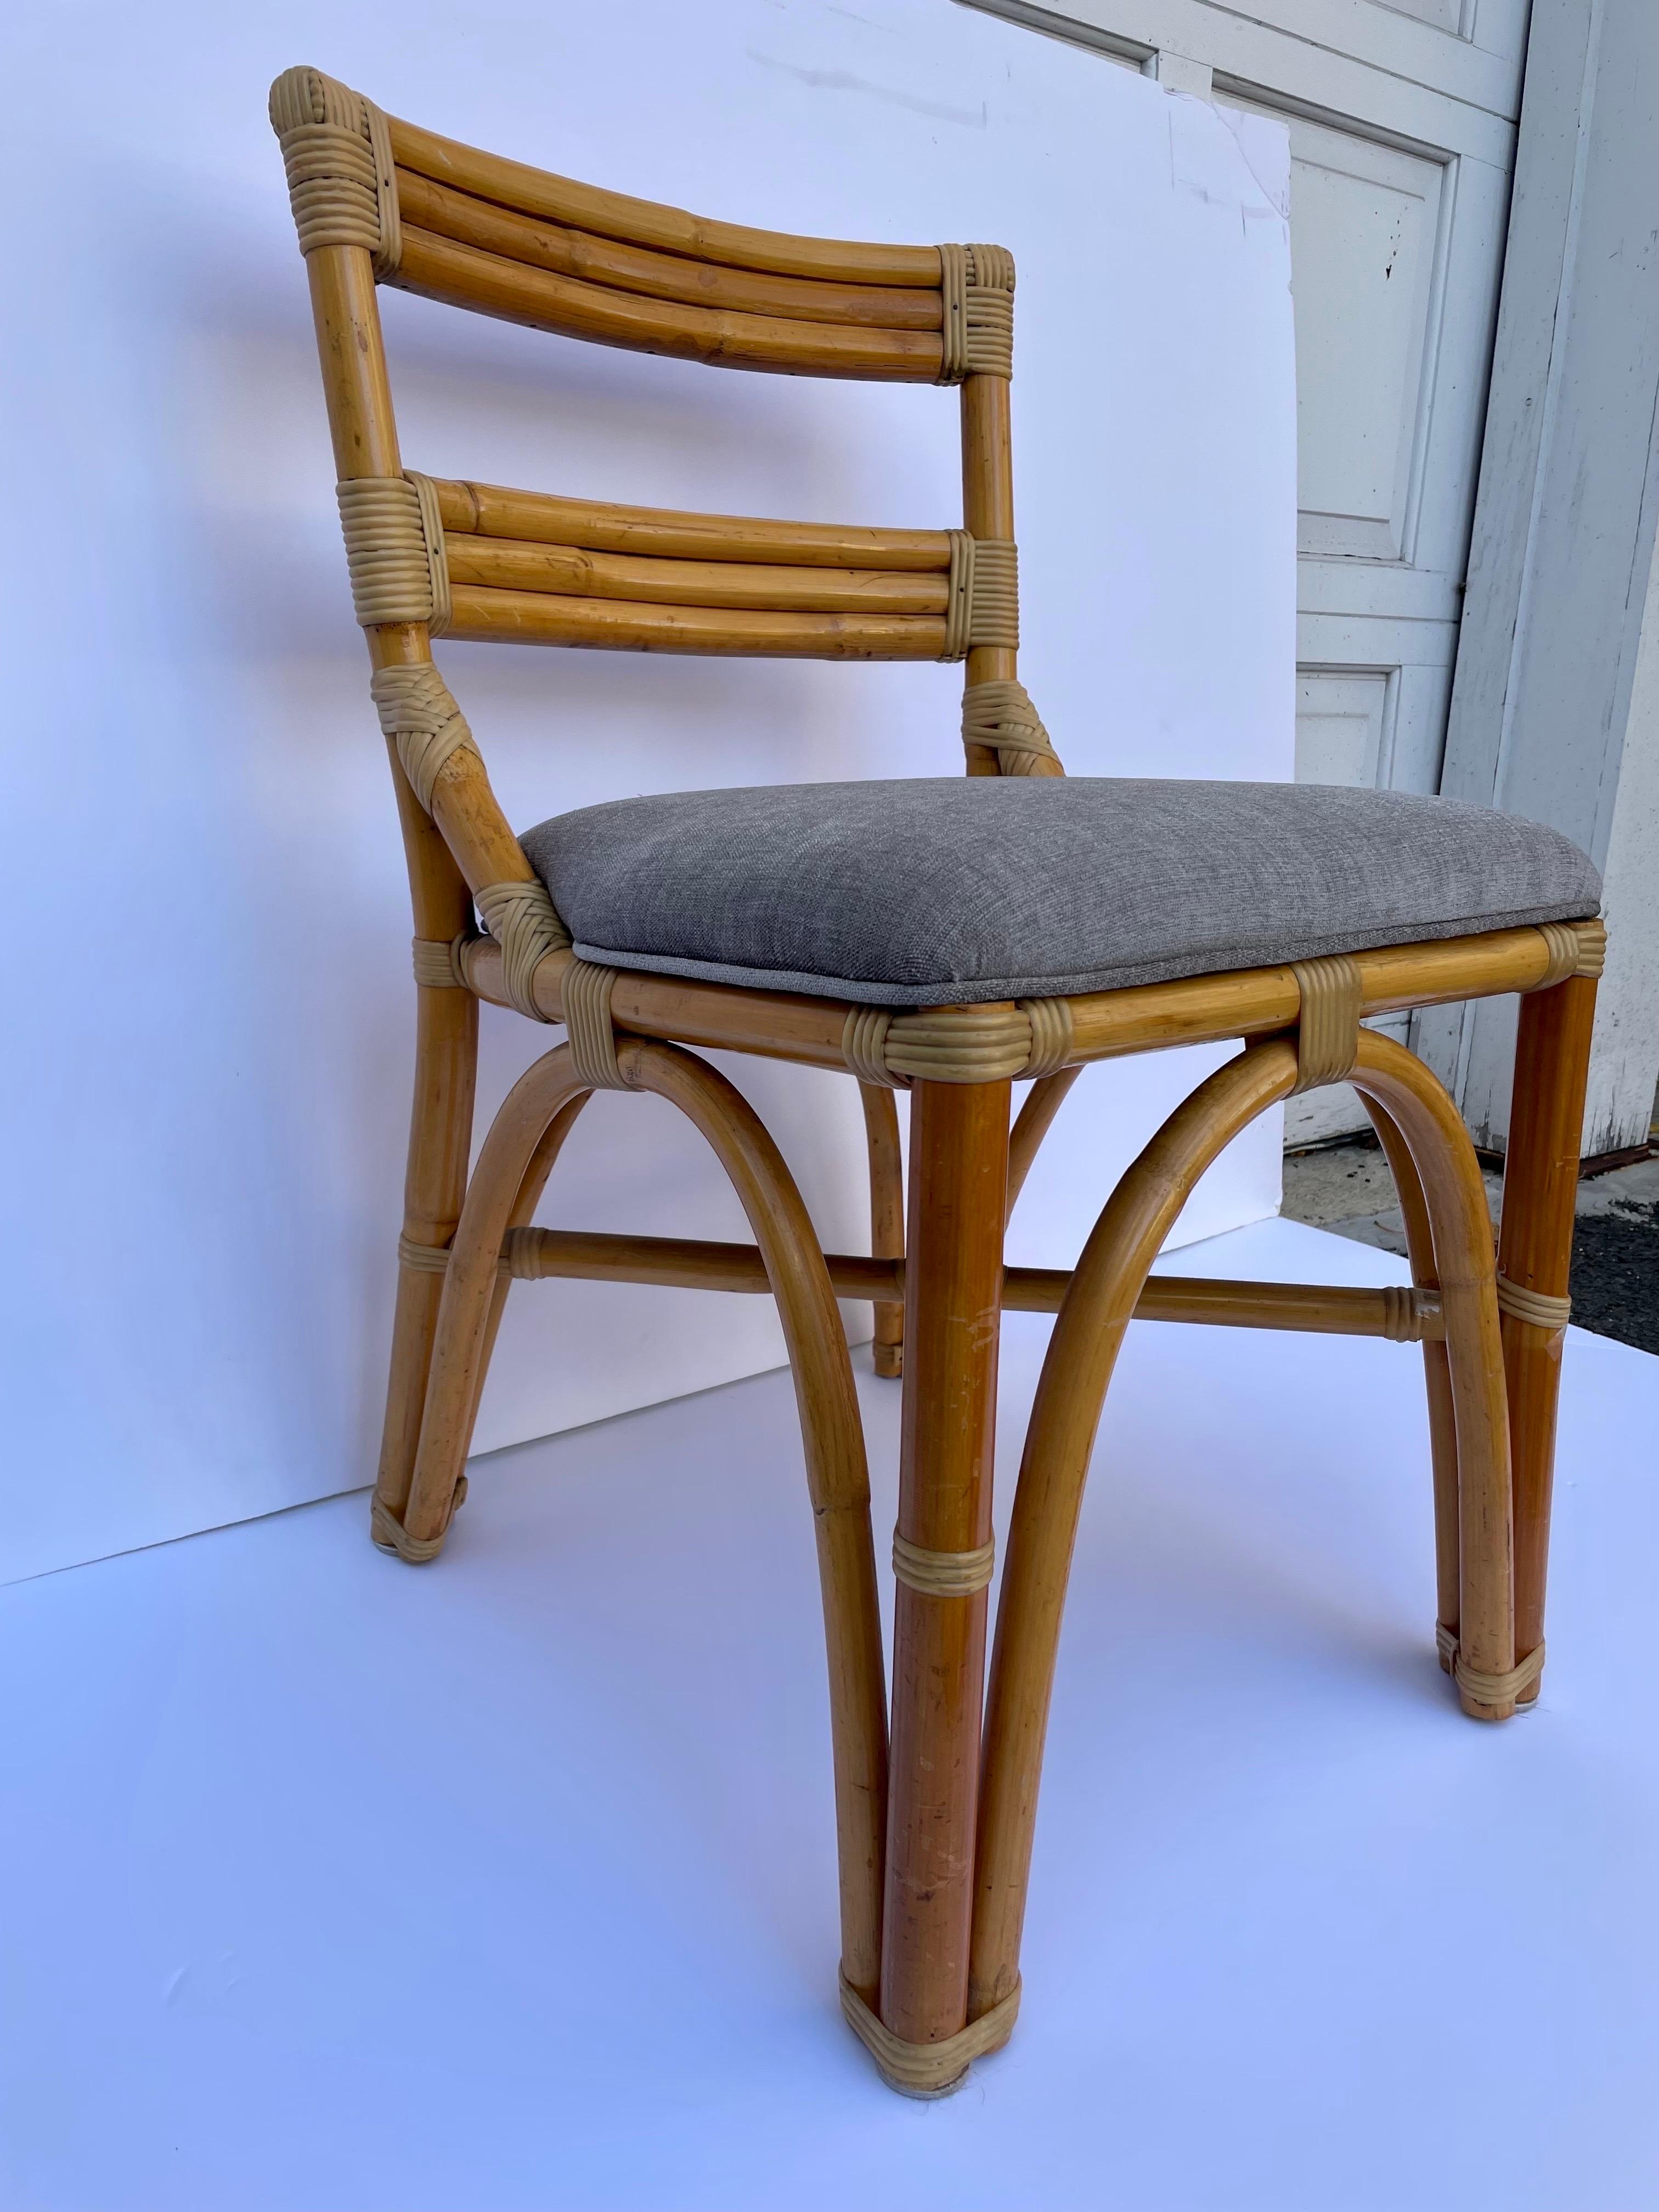 Paul Frankl style arched base bamboo side or desk chair with new grey chenille upholstery. Slight wear to frame finish from age appropriate wear and use.